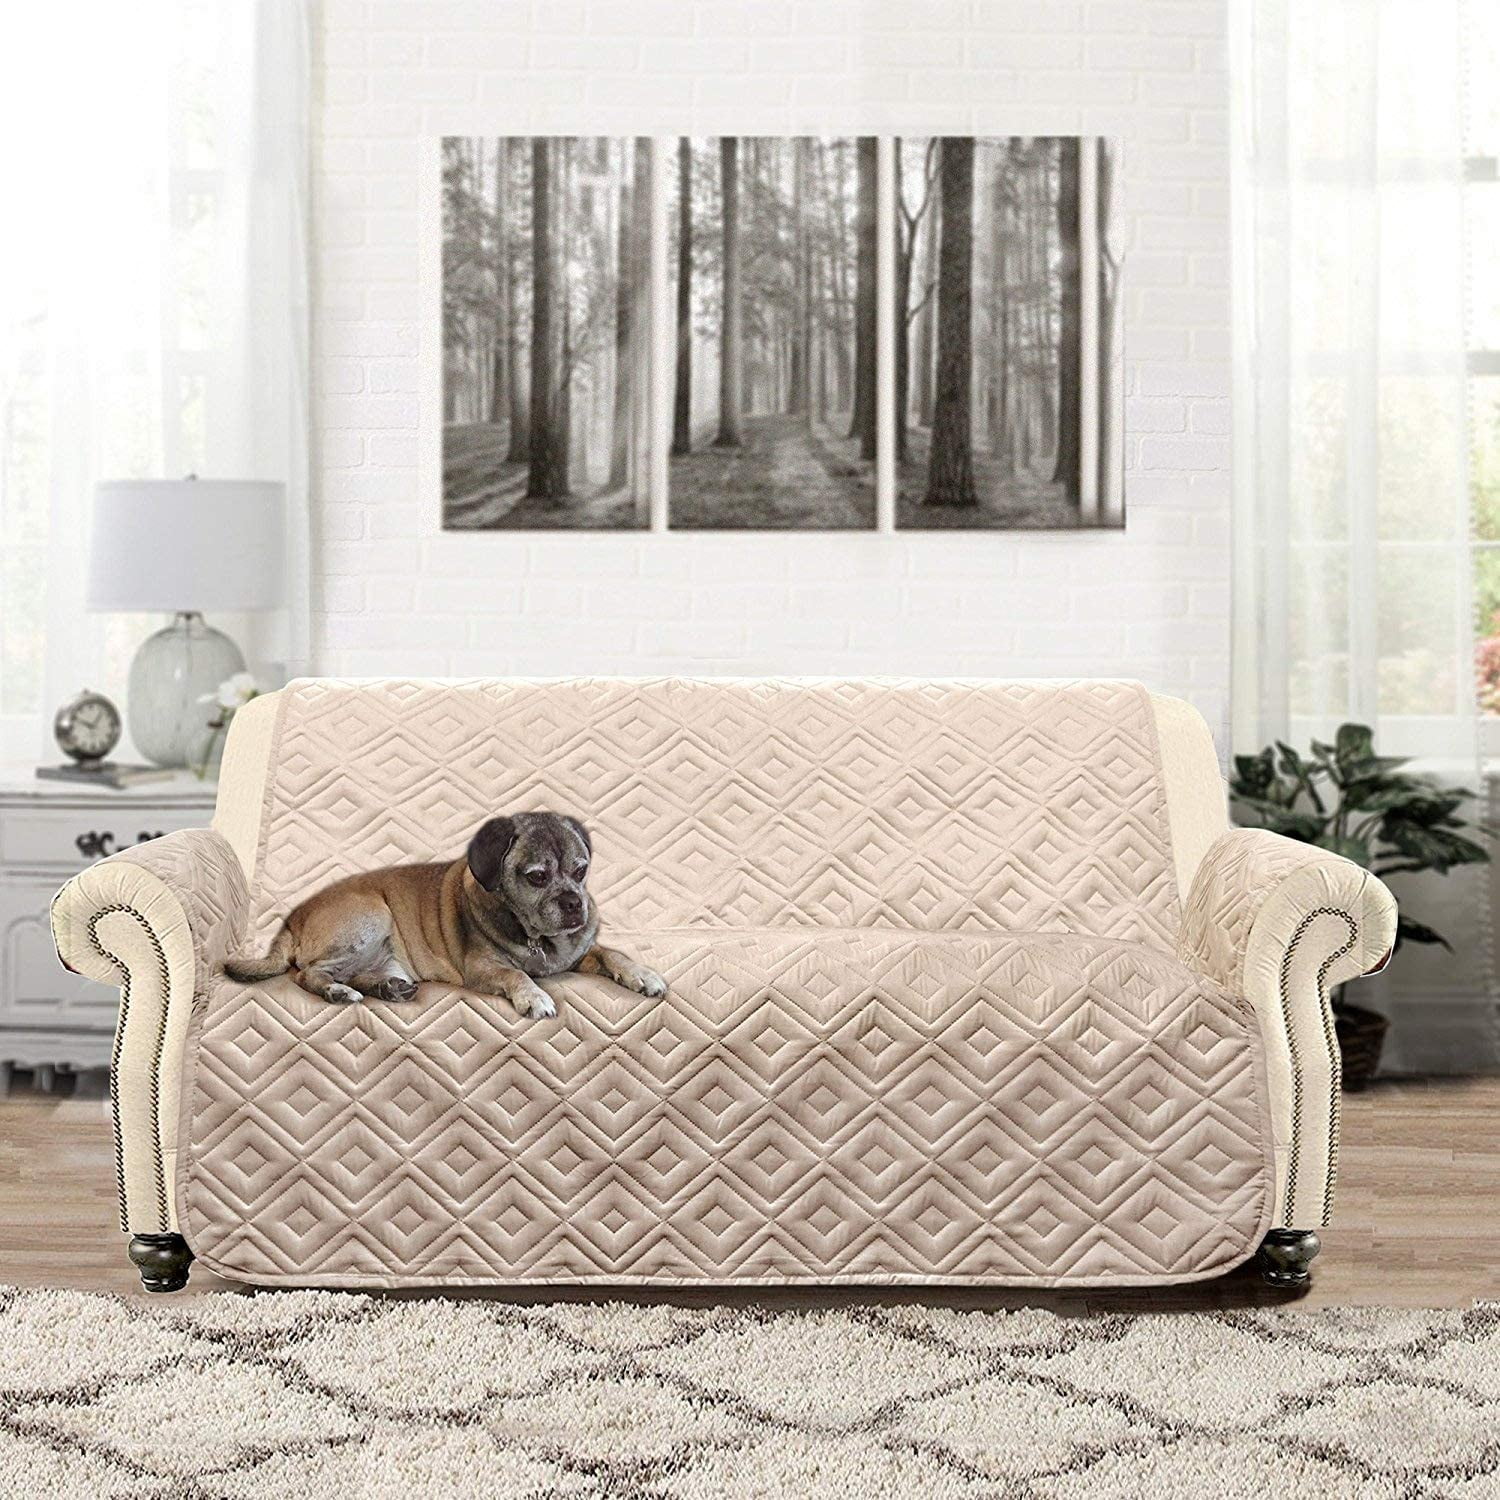 New Loveseat Slipcover for Pets Quilted Zebra Pattern 88 x 70.5 inches 